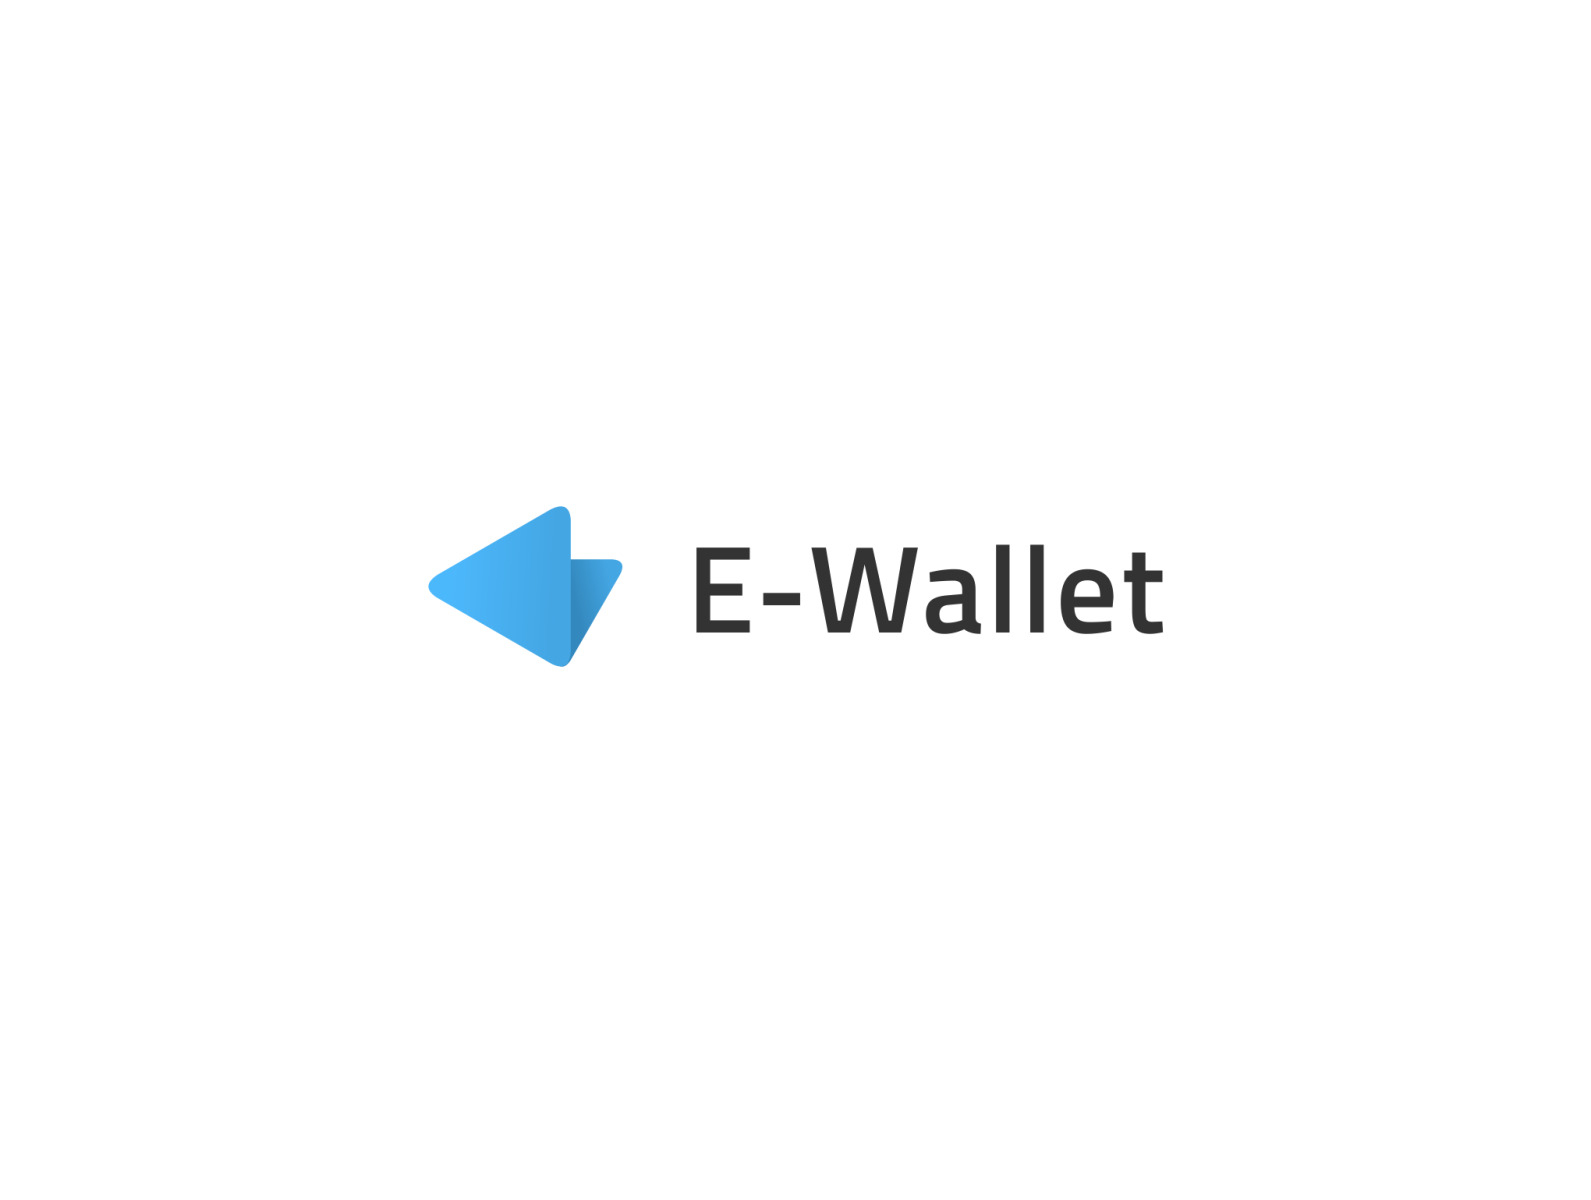 How Long Does It Take To Receive E-wallet SMS From Hollywood